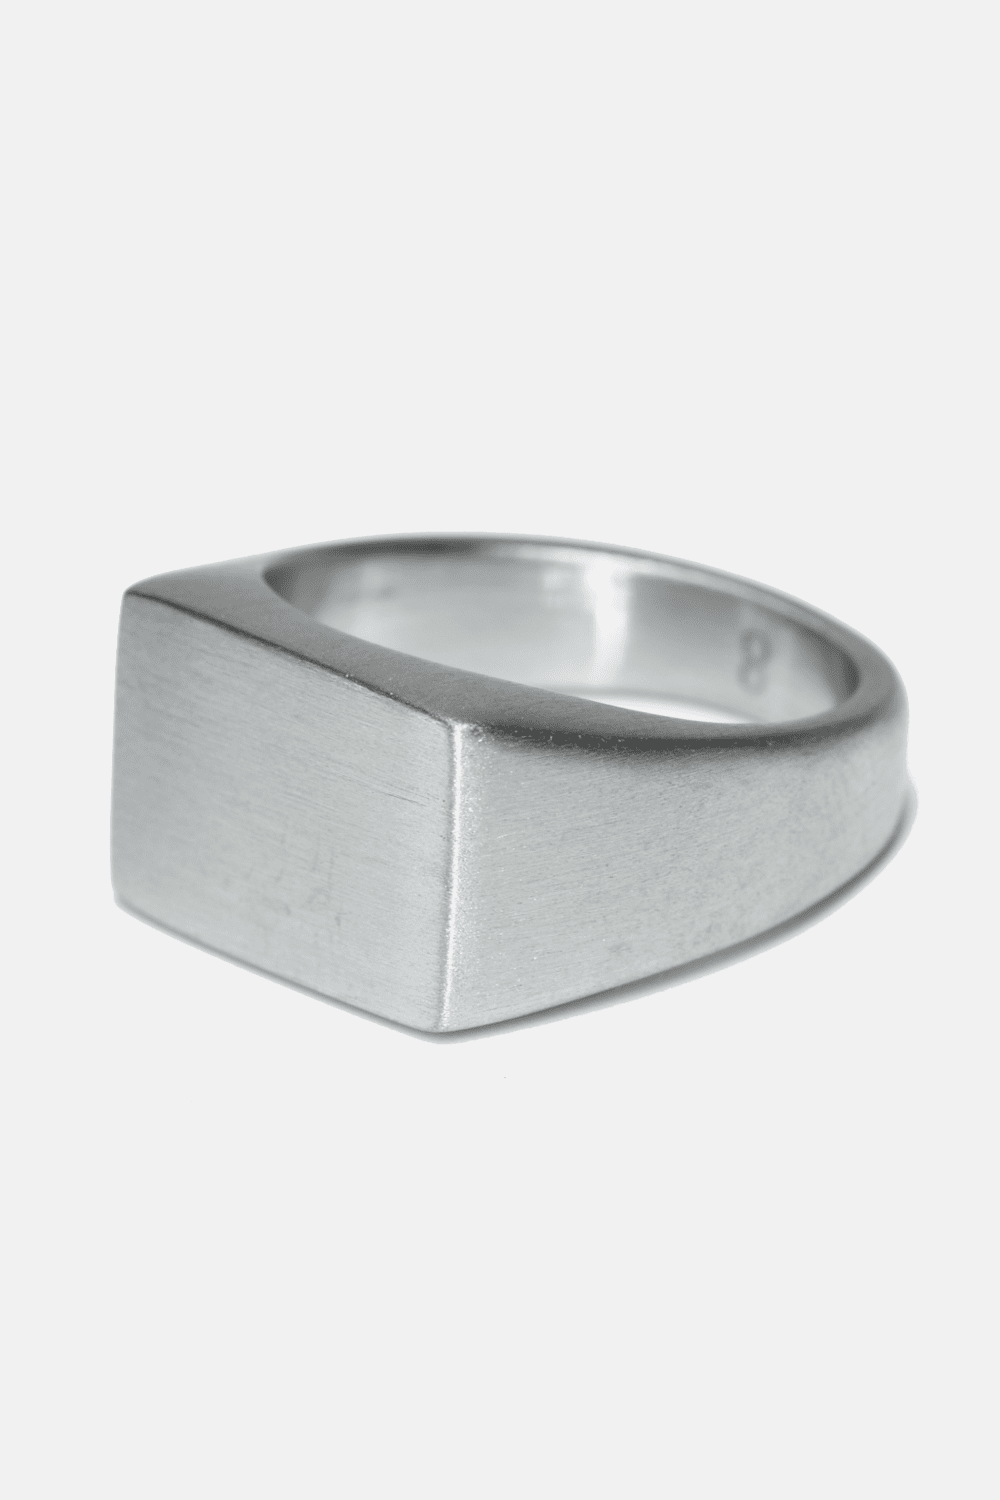 Curated Basics - Flat Top Ring Rings